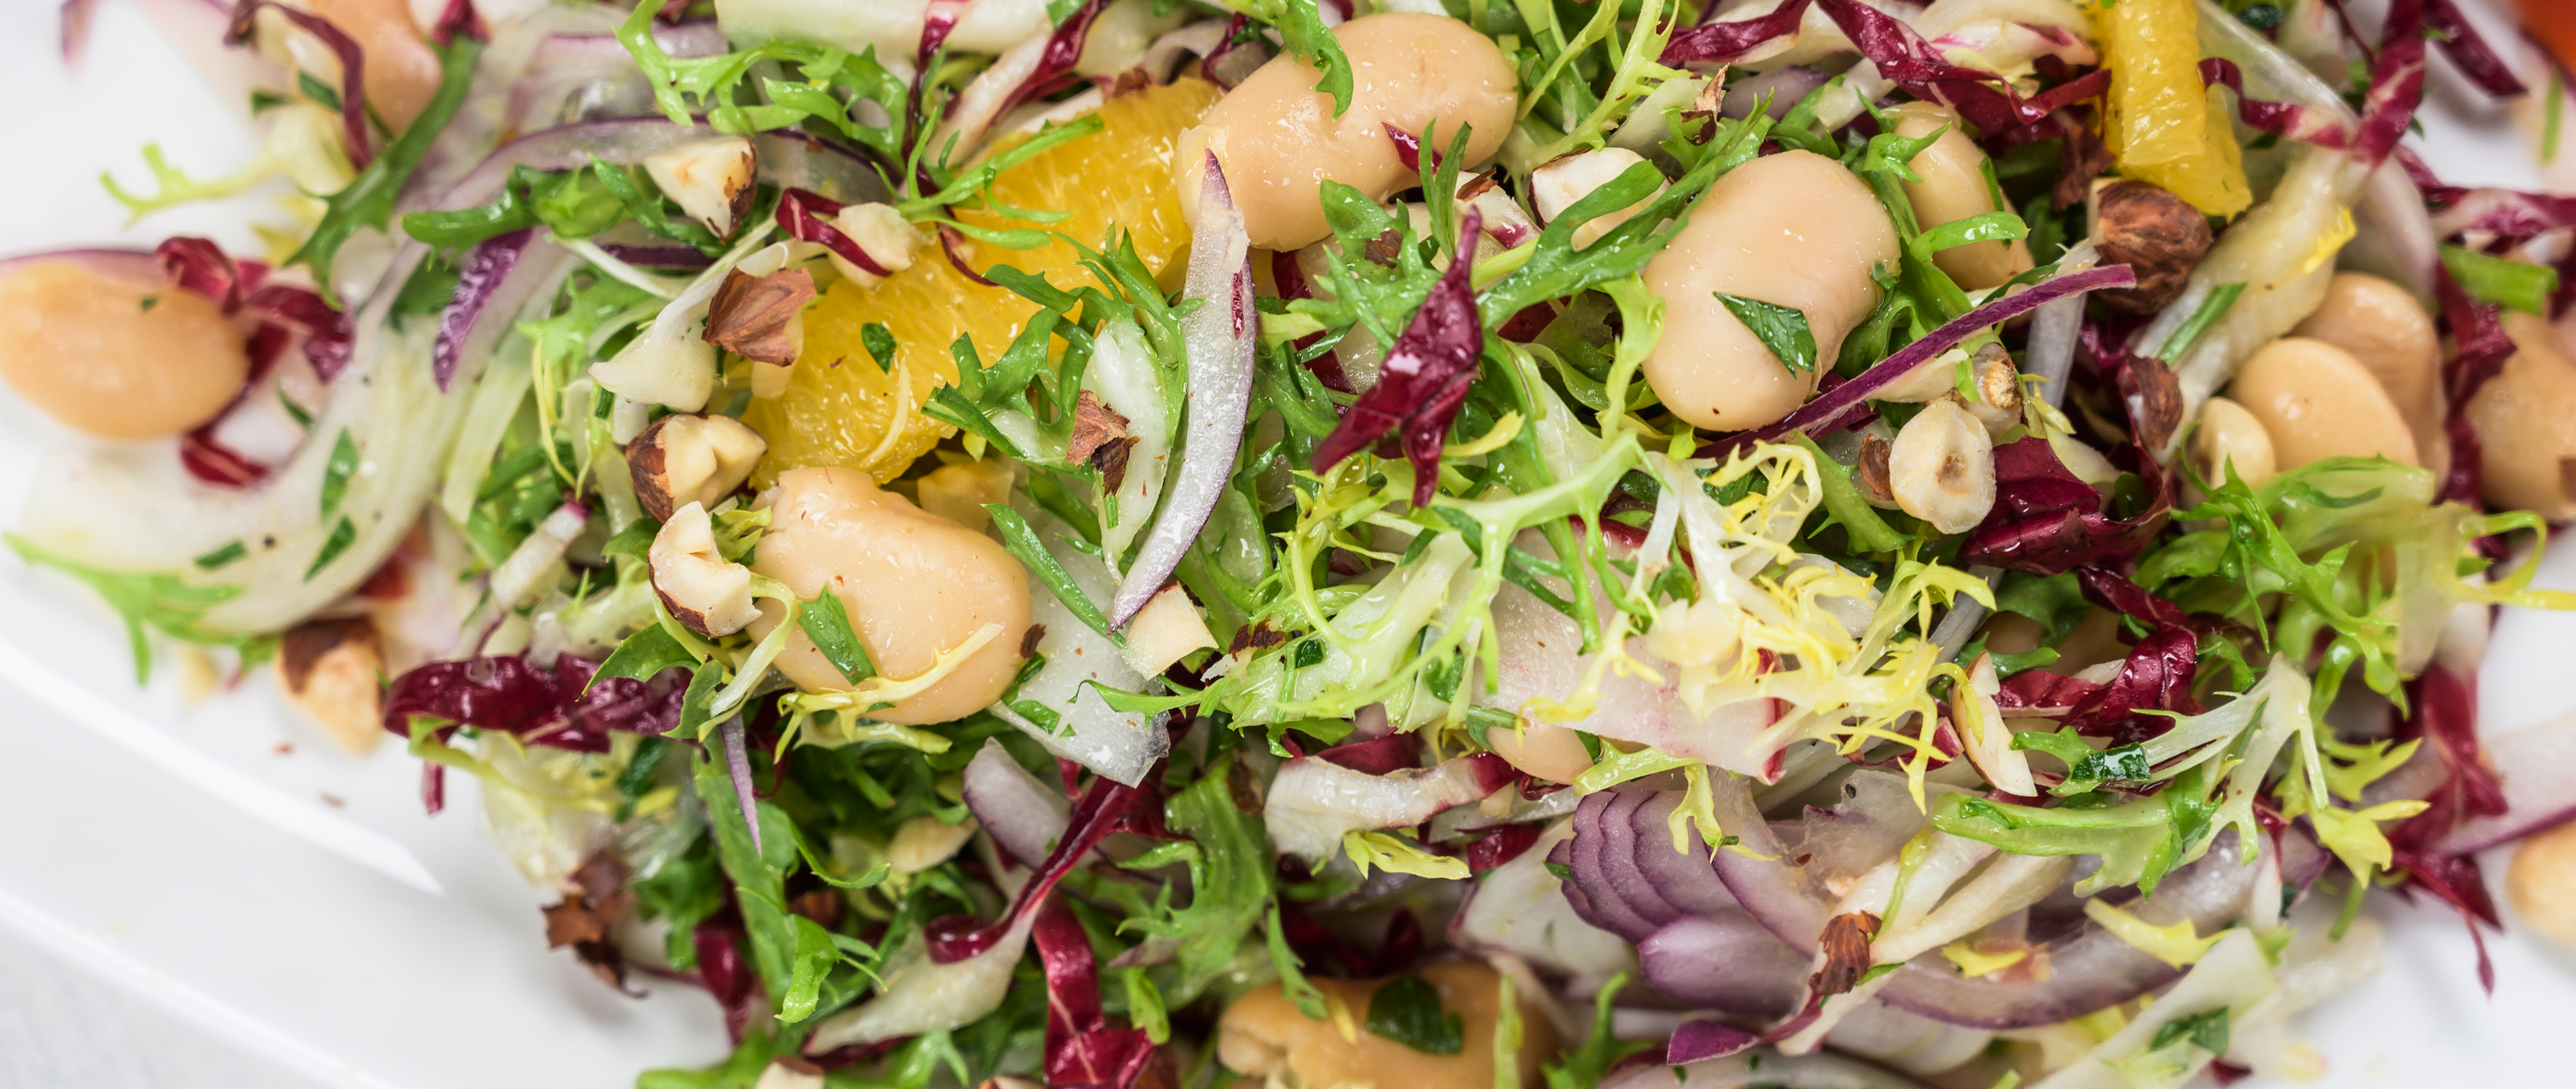 Frisée and Fennel Salad with Citrus Fruit and Butter Beans